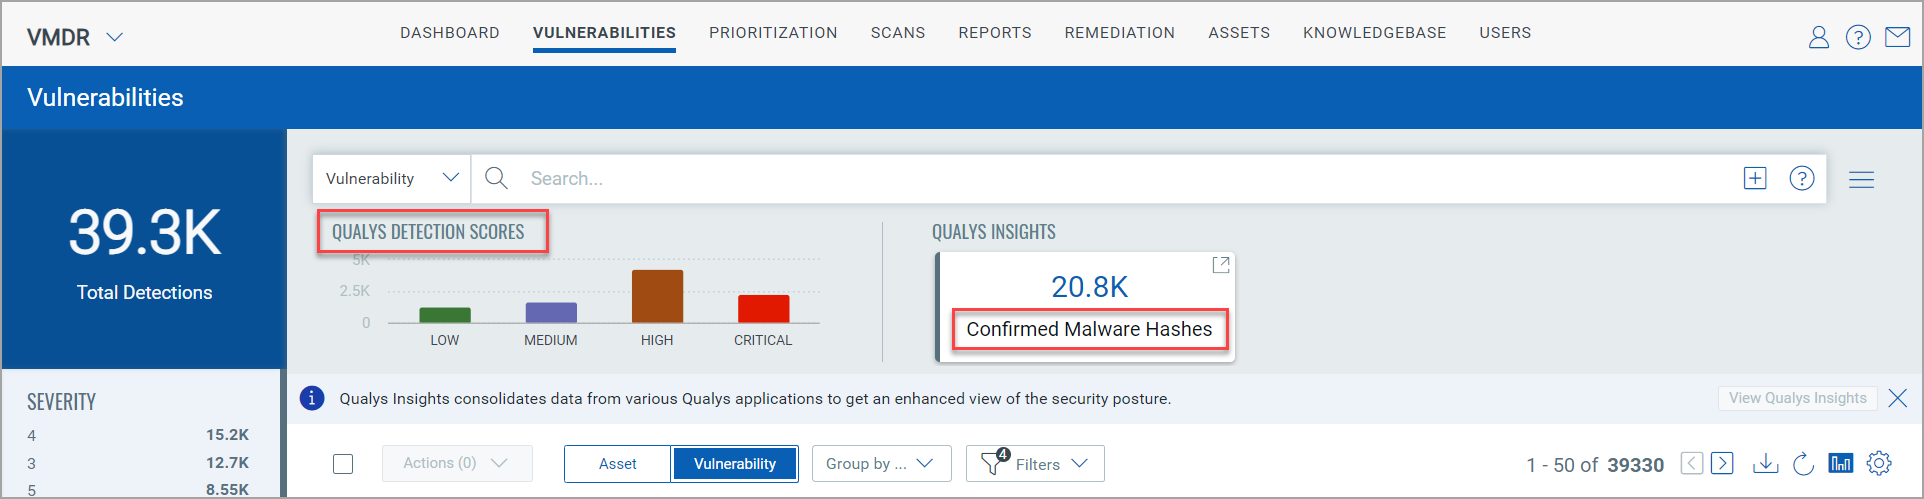 QDS and Confirmed Malware hashes options